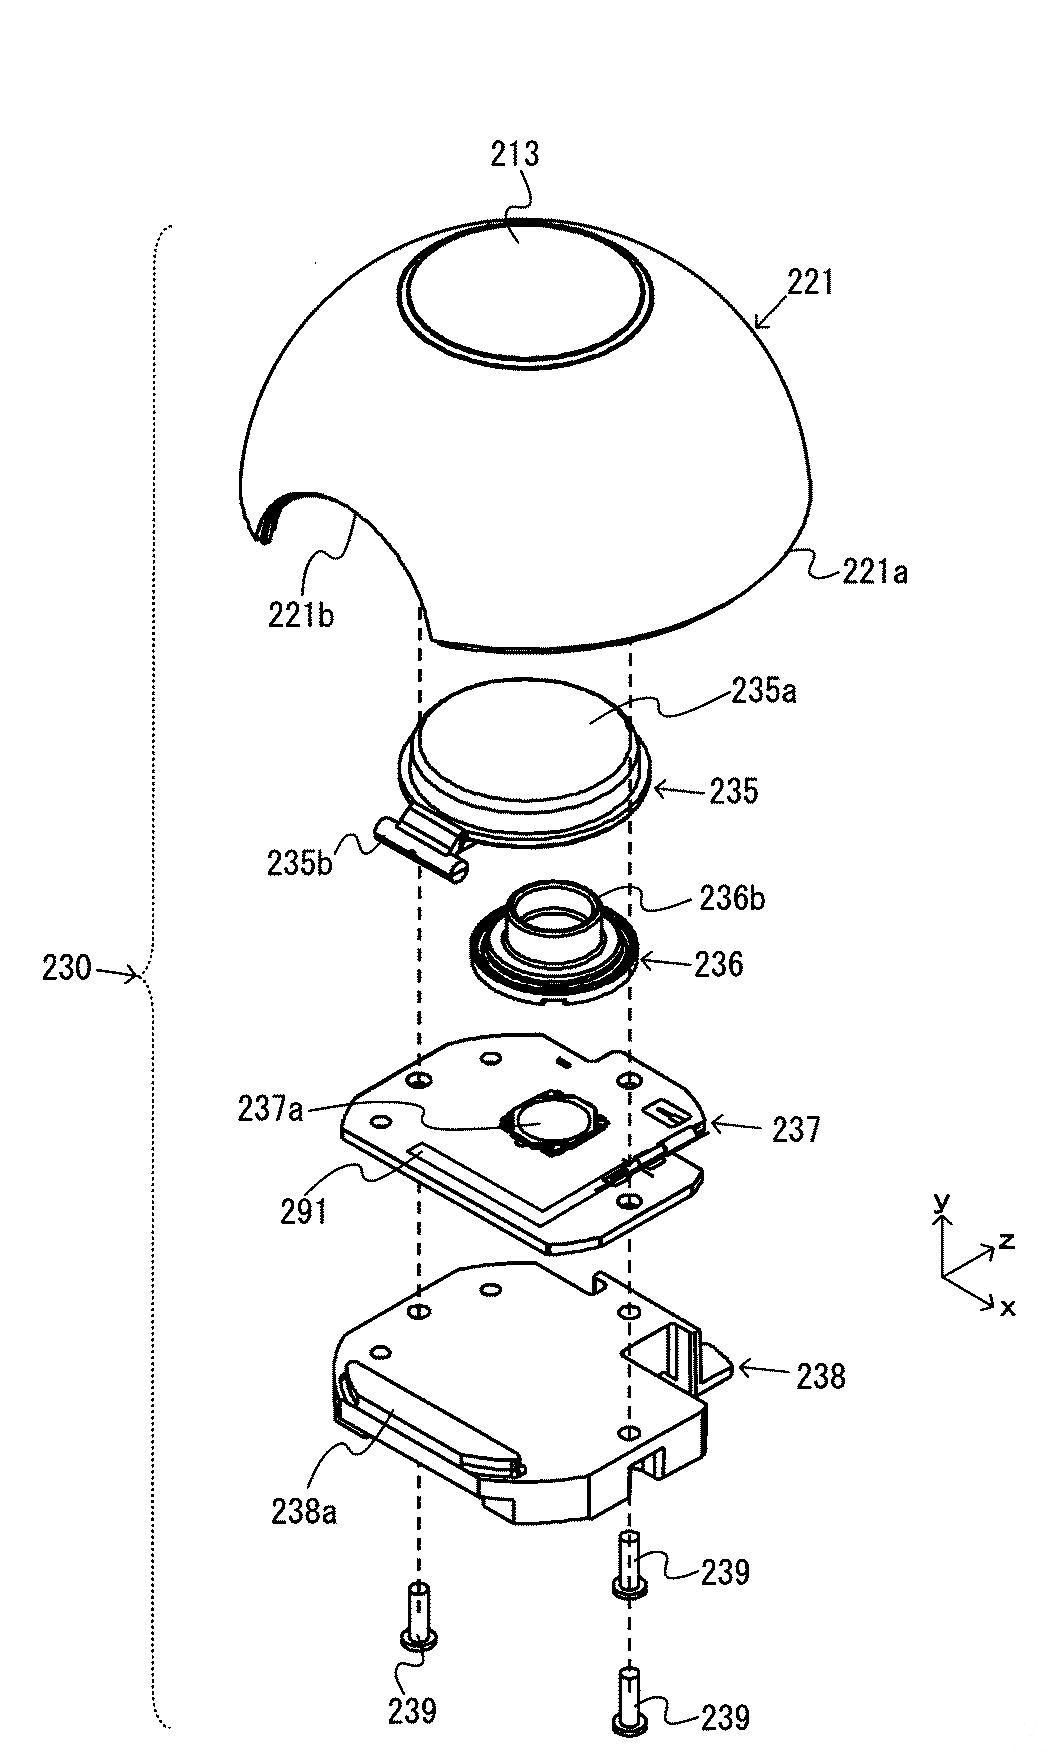 Nintendo registered five patents related to the peripheral PokéBall Plus